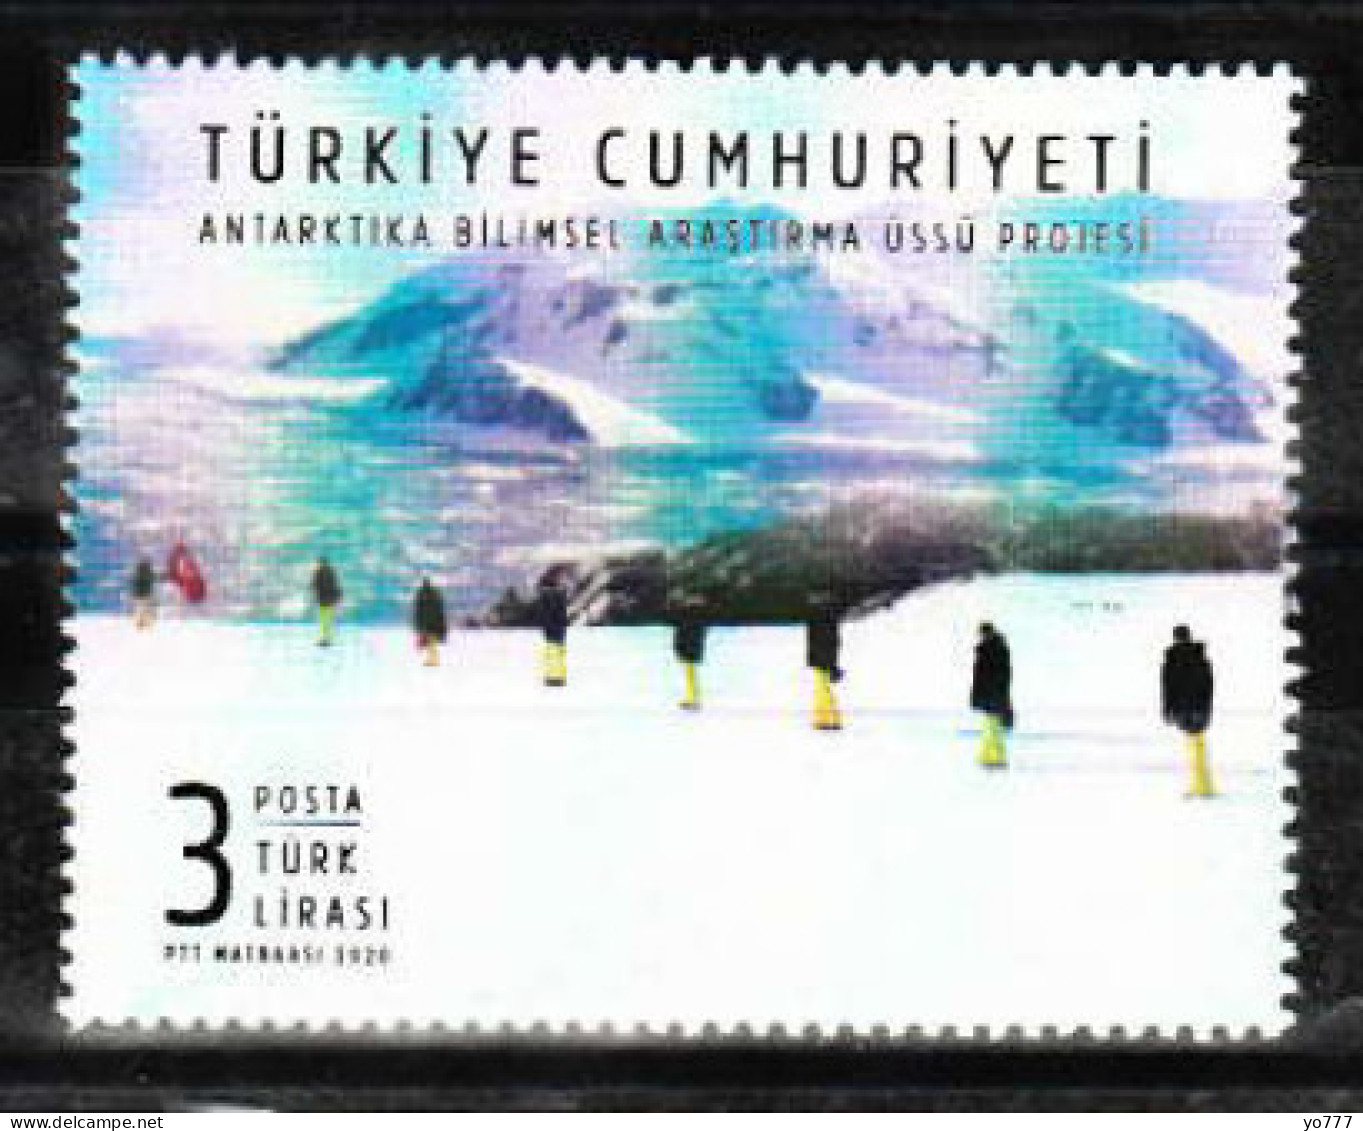 (4545) THE PROJECT OF SCIENTIFIC RESEARCH STATION ANTARCTICA MNH** - Unused Stamps